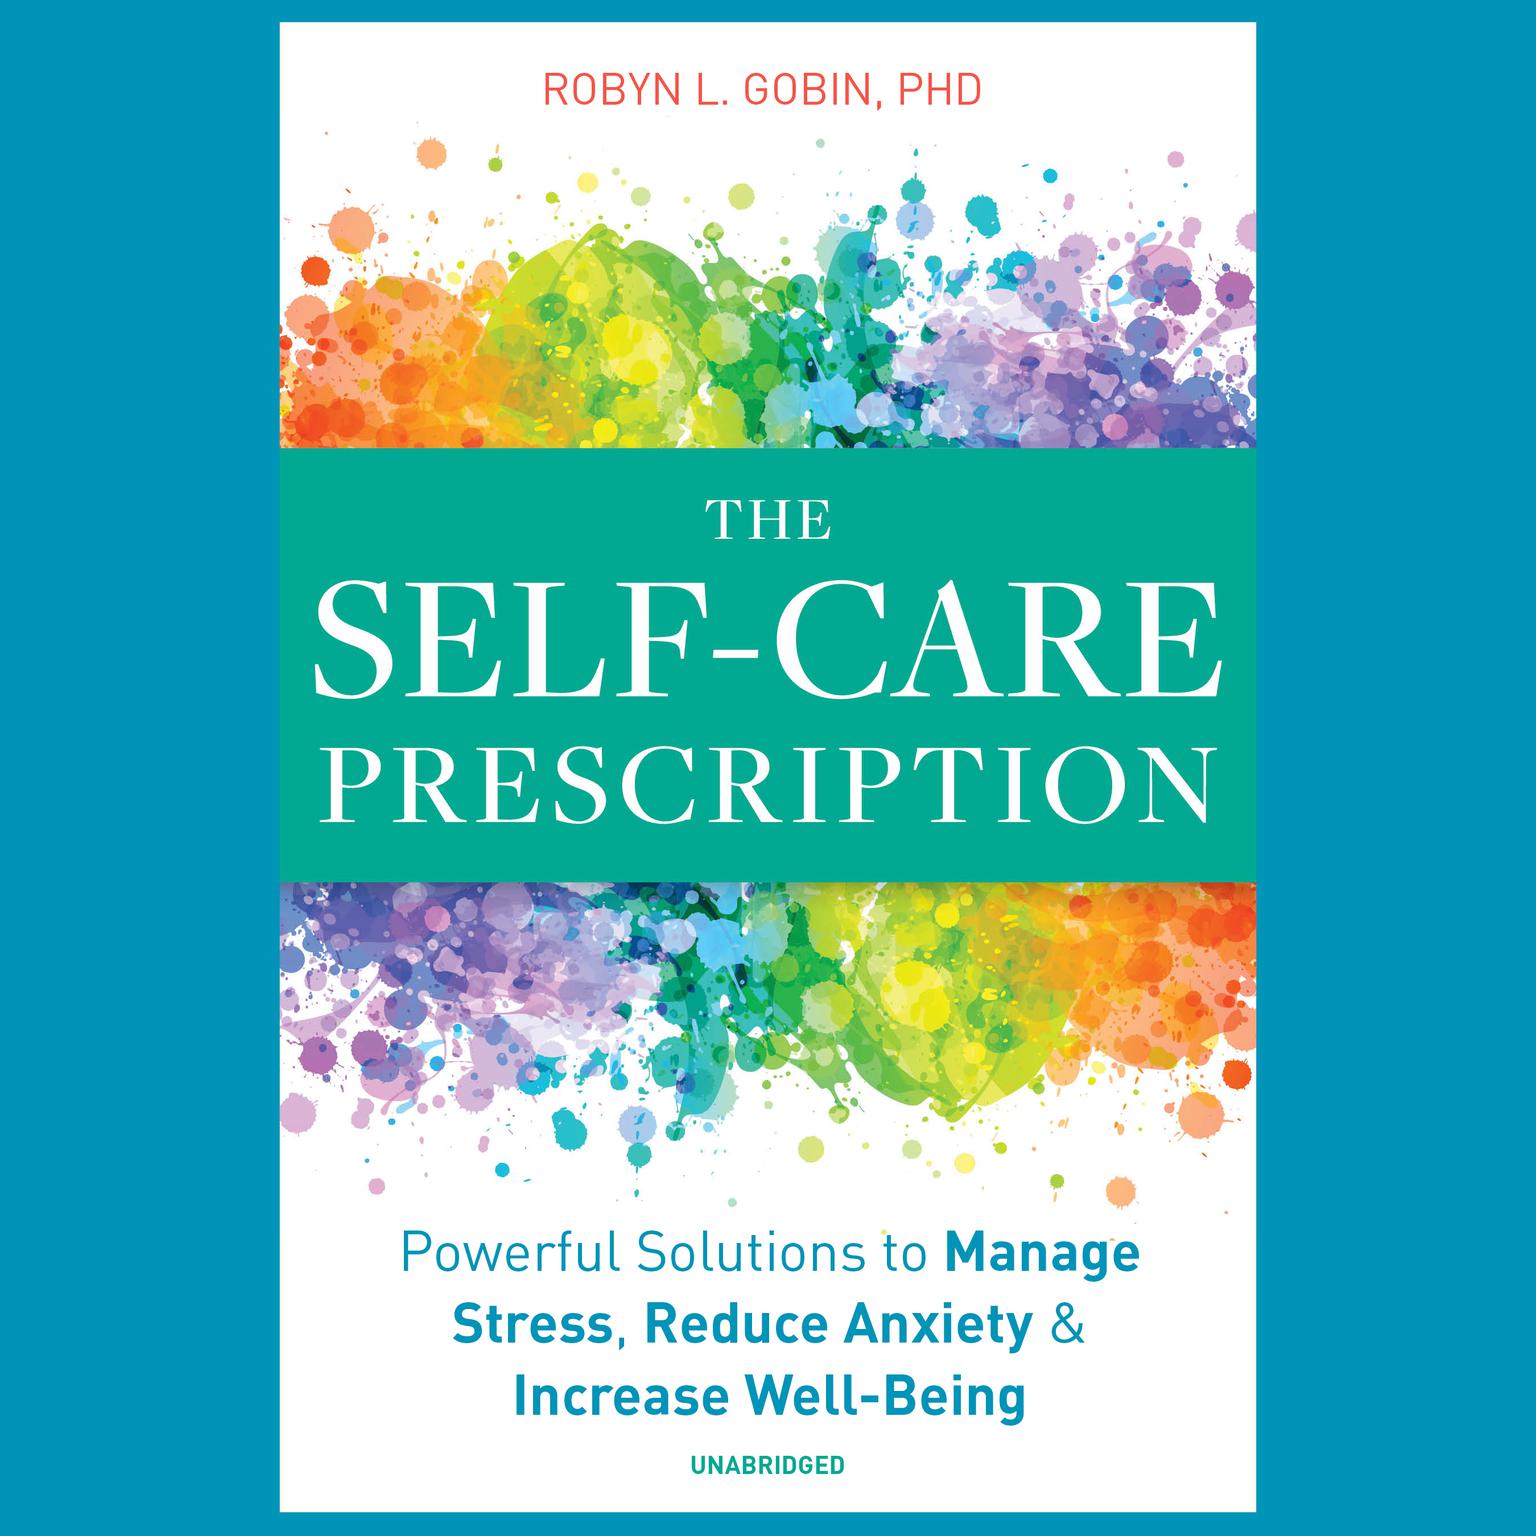 The Self-Care Prescription: Powerful Solutions to Manage Stress, Reduce Anxiety & Increase Well-Being Audiobook, by Robyn L. Gobin